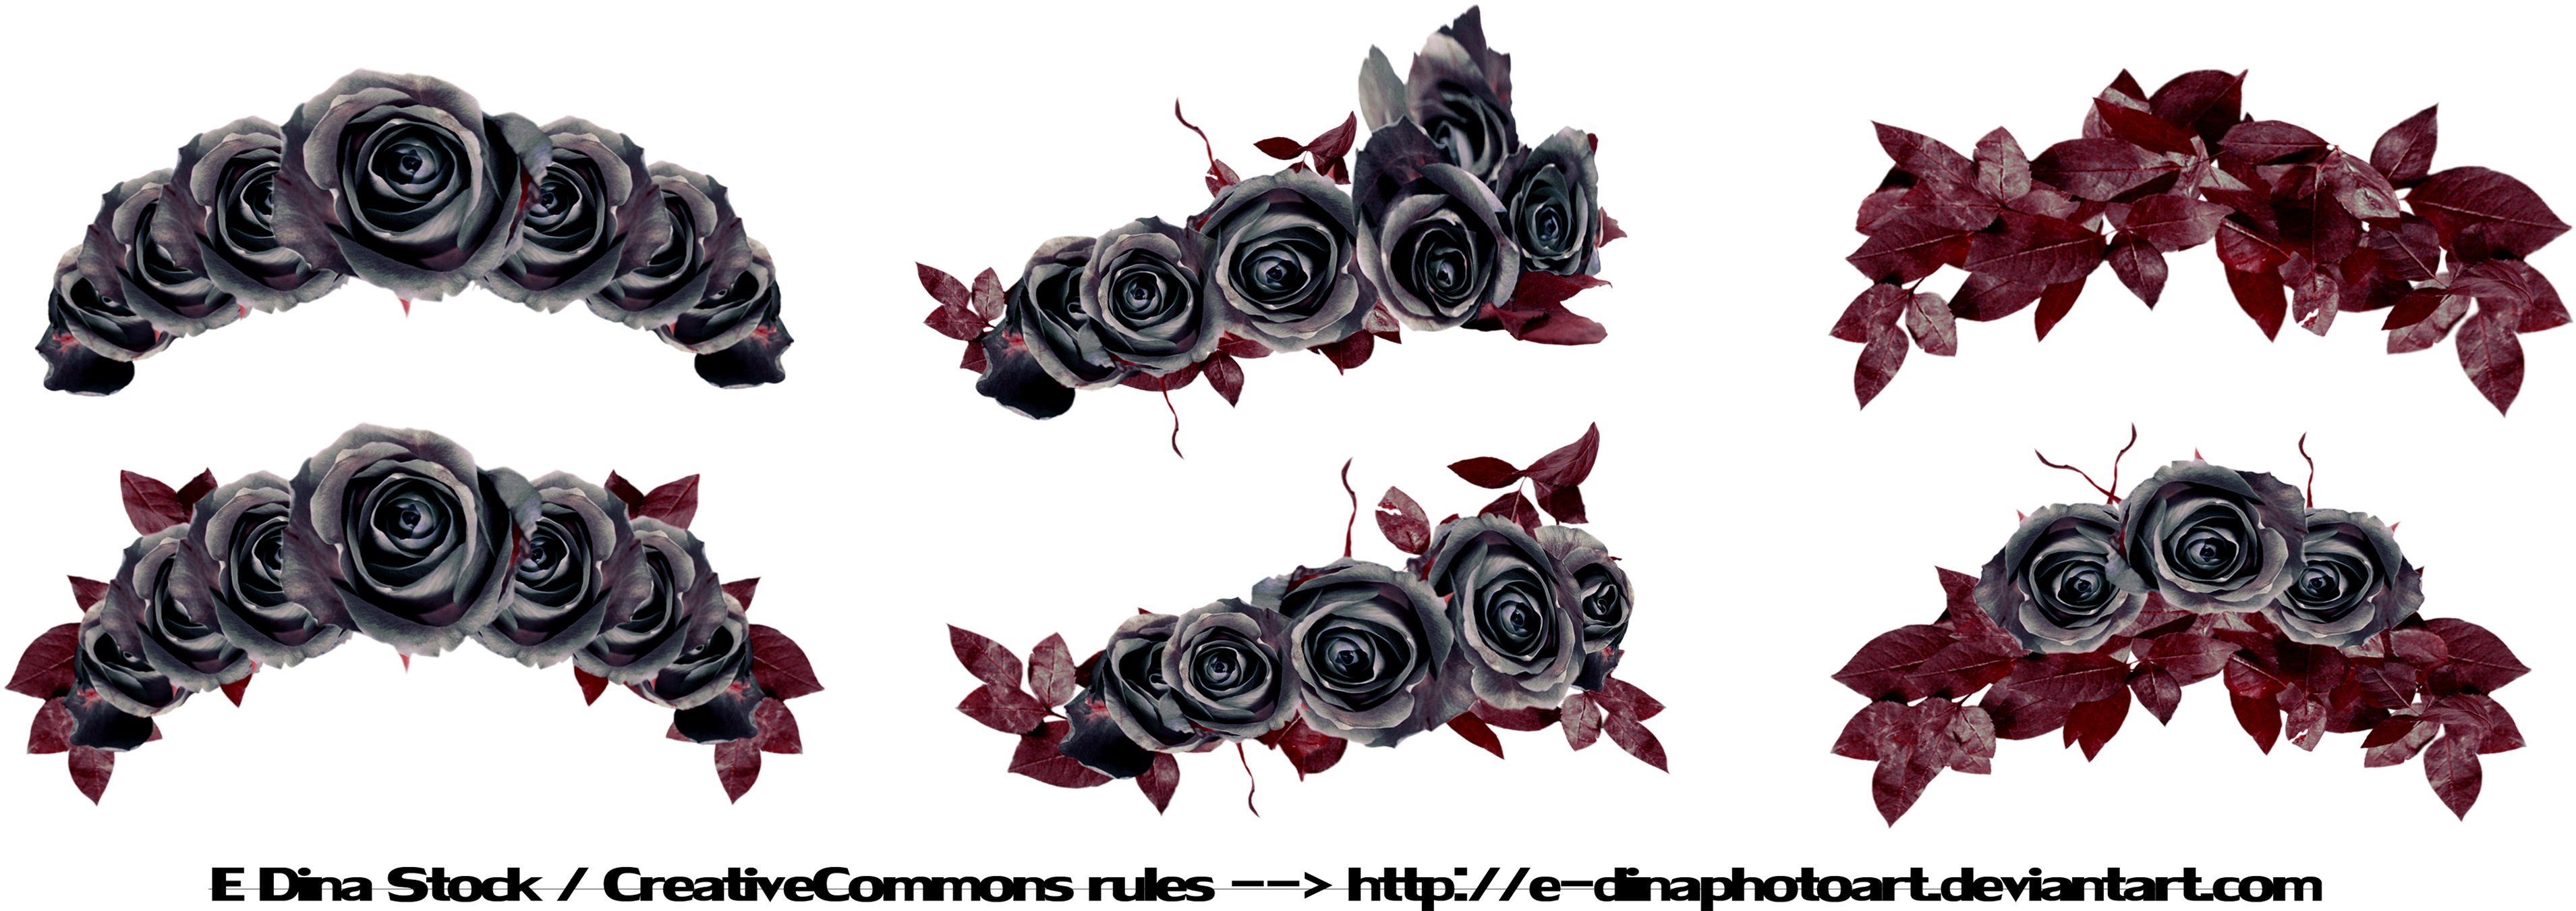 Png Stock Floralwreath Dark Roses By E Dinaphotoart - Dead Flower Crown Png (4210x1403)